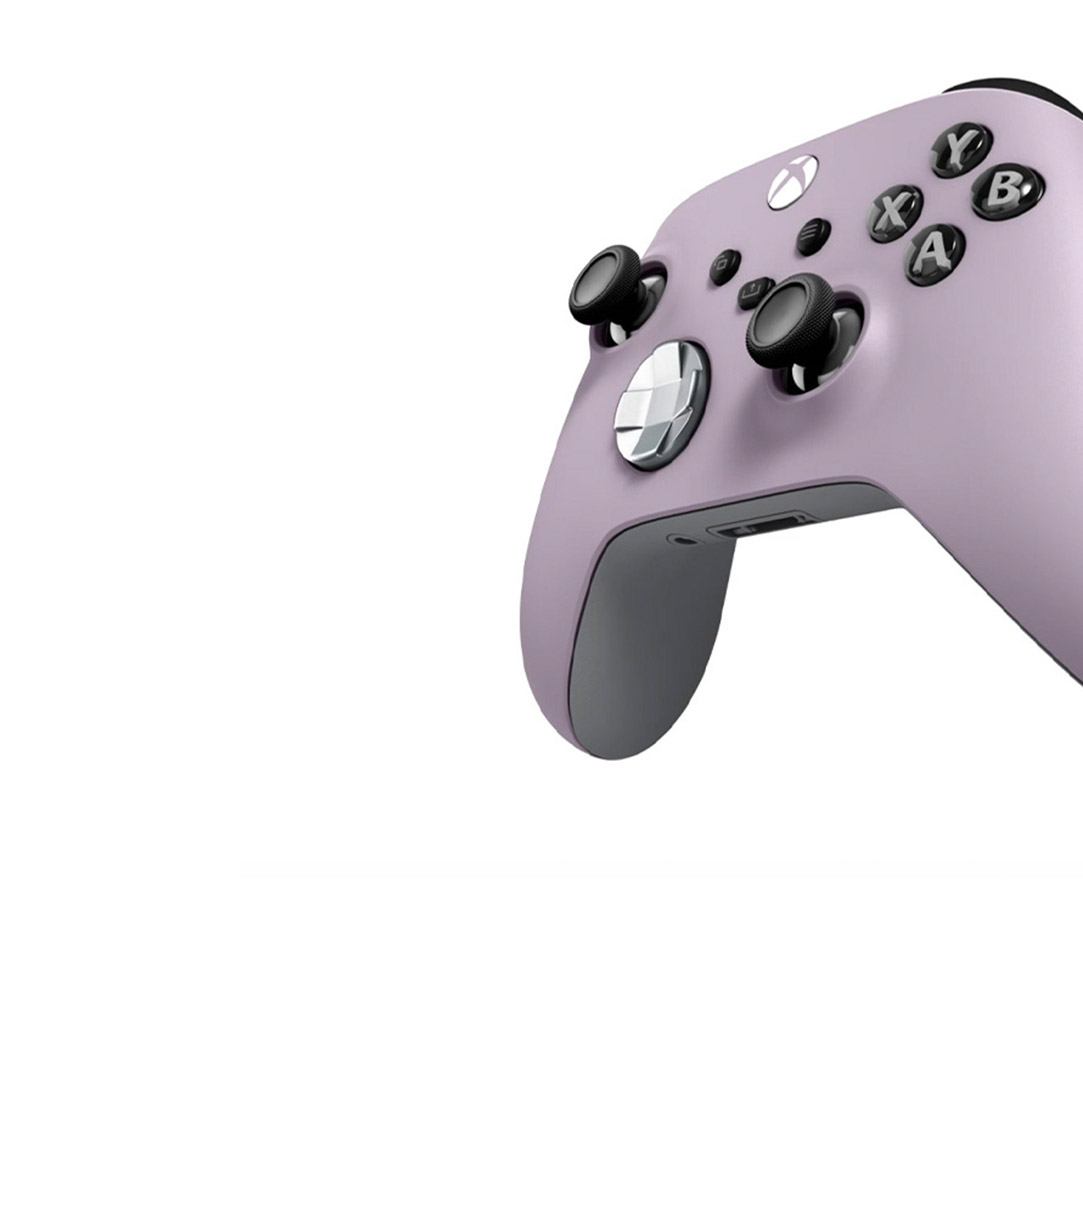 Xbox Design Lab controller spinning and changing colours, featuring new grips, triggers and dpads.